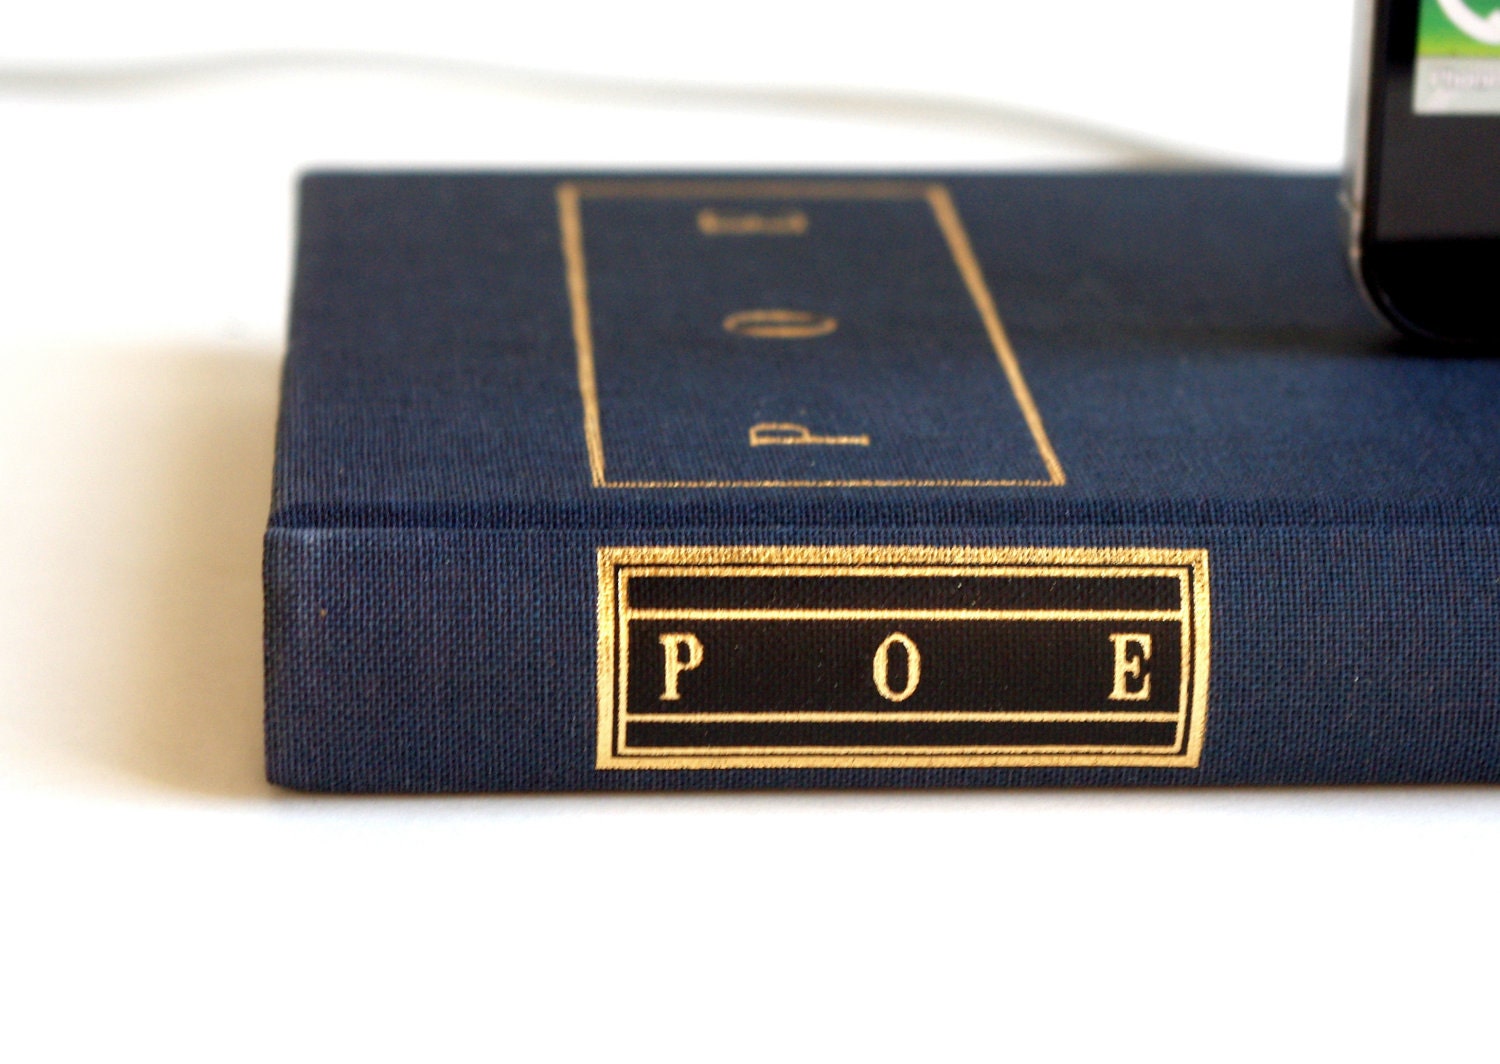 Edgar Allen Poe Mini Book Dock Charger for iPhone and iPod